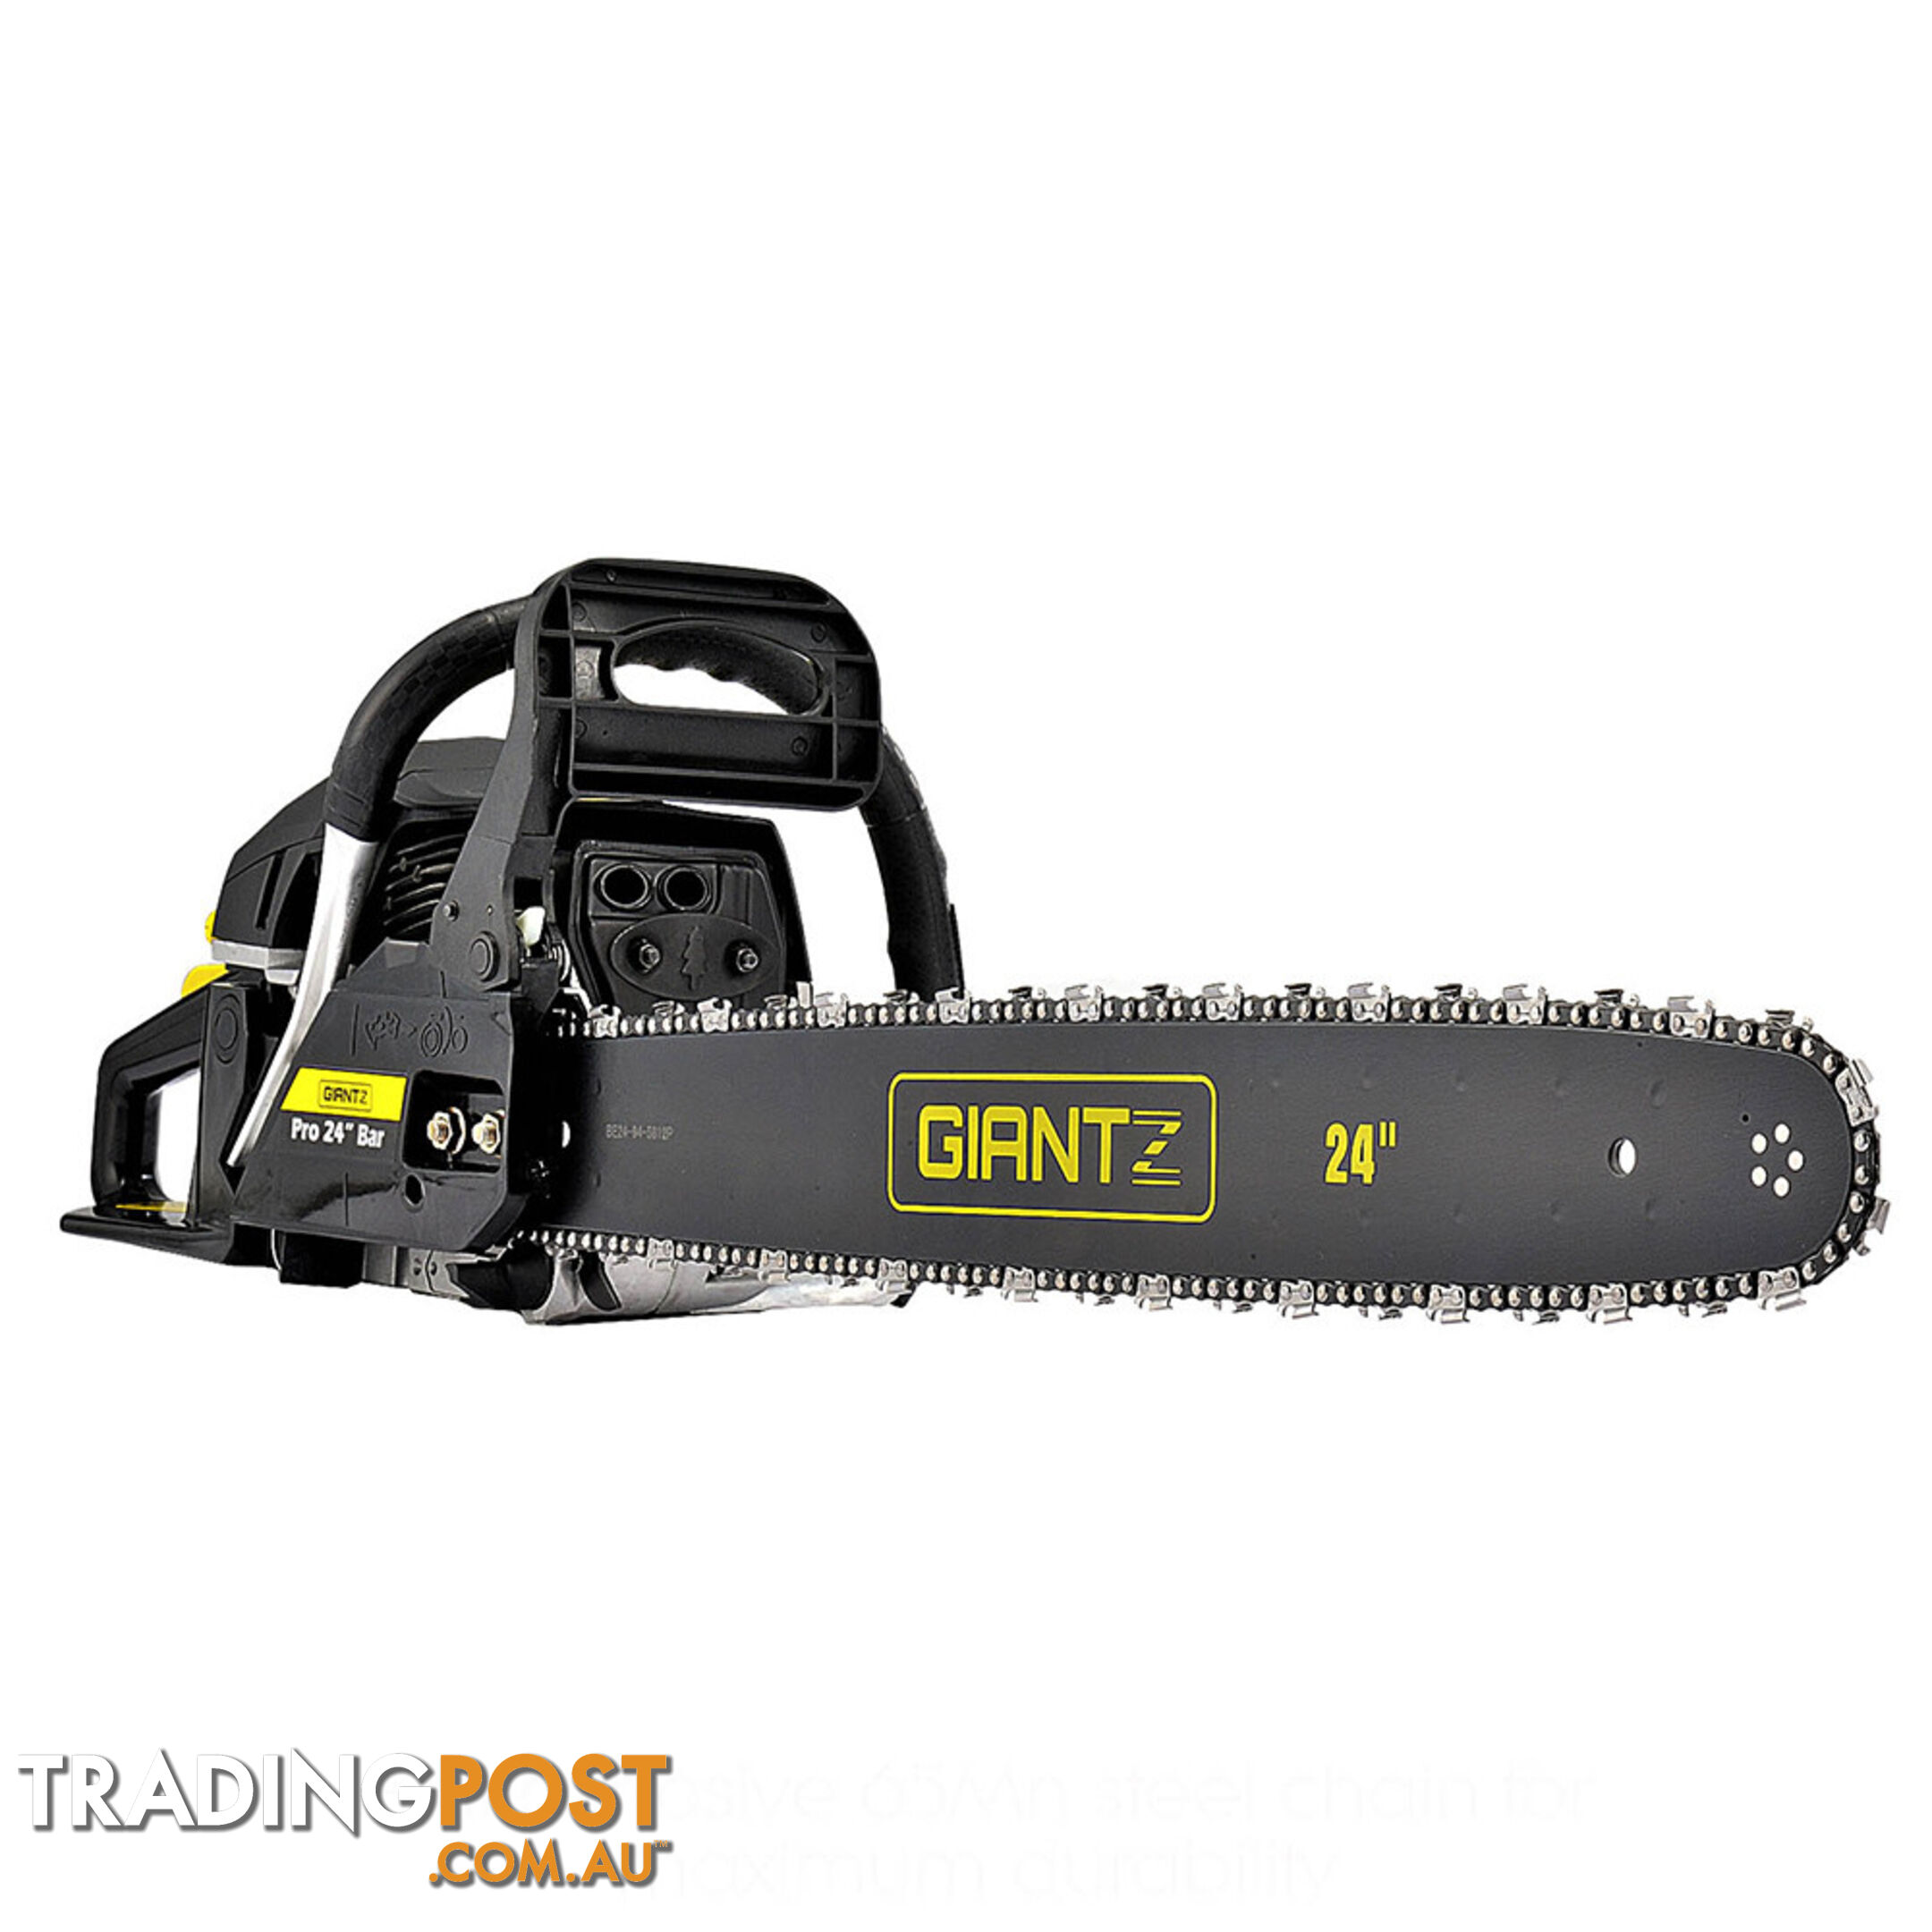 Giantz 66CC Petrol Chainsaw w/ Carry Bag and Safety Set